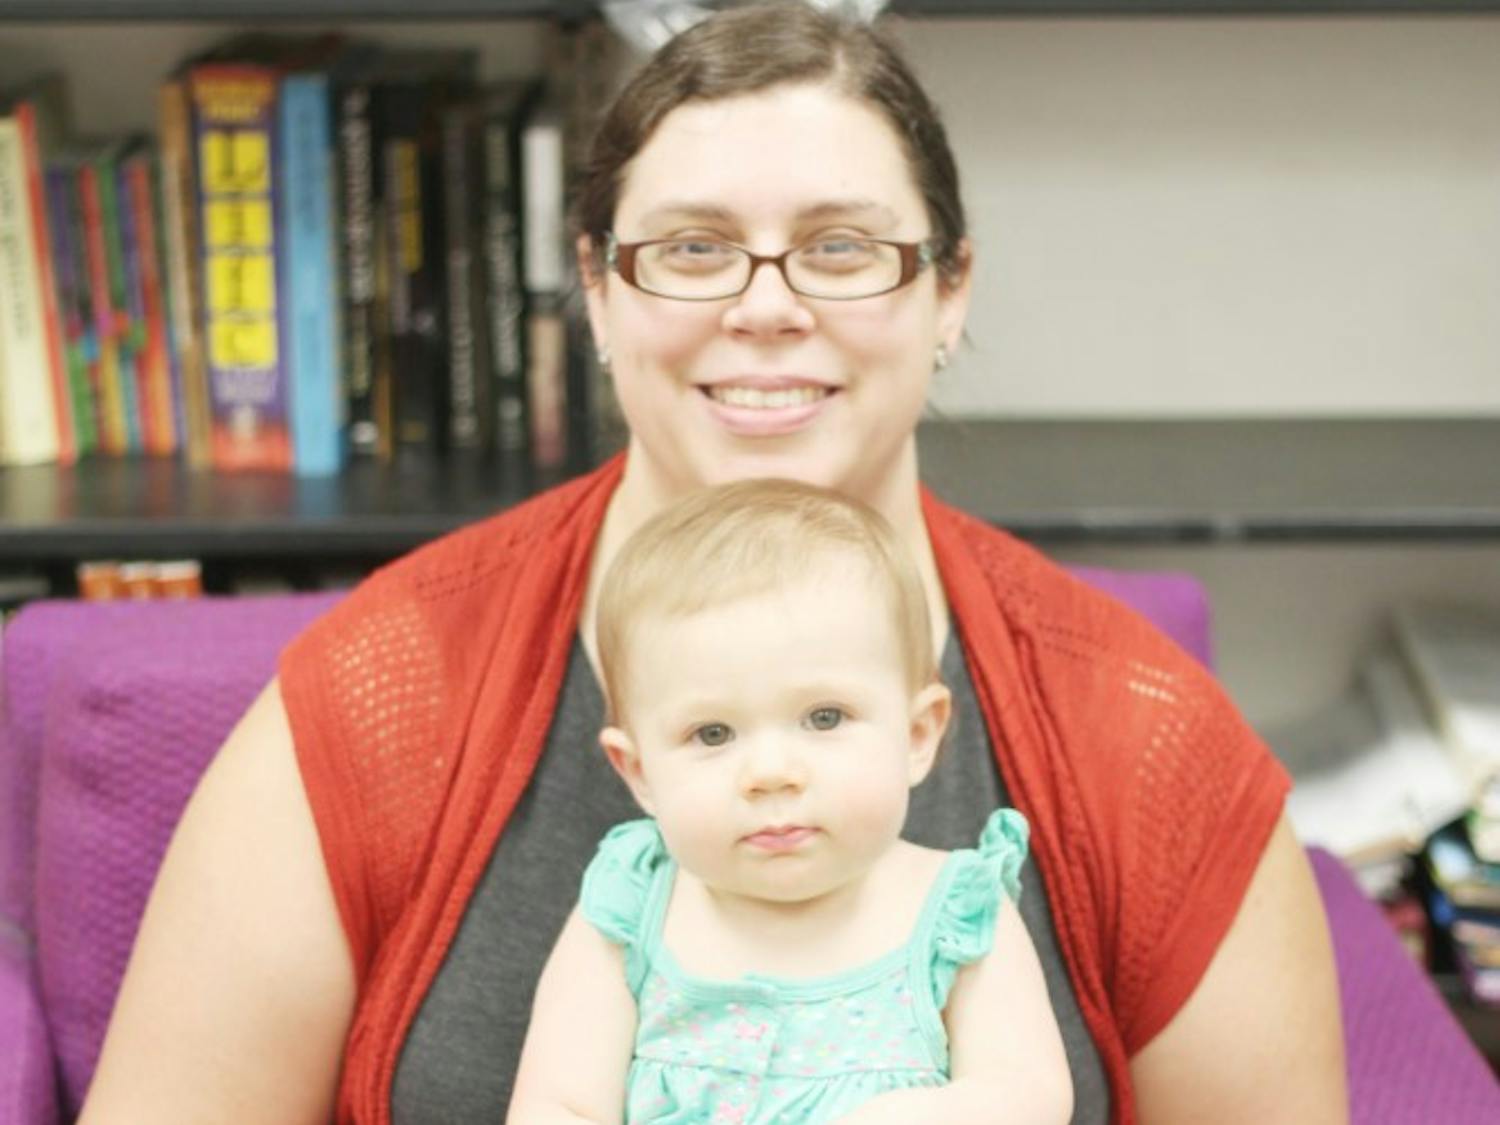 Leslie Nickerson sits with her one-year-old daughter. Nickerson, a TA and English Ph.D candidate at UB, has had to balance her work and motherhood while being financially unstable.